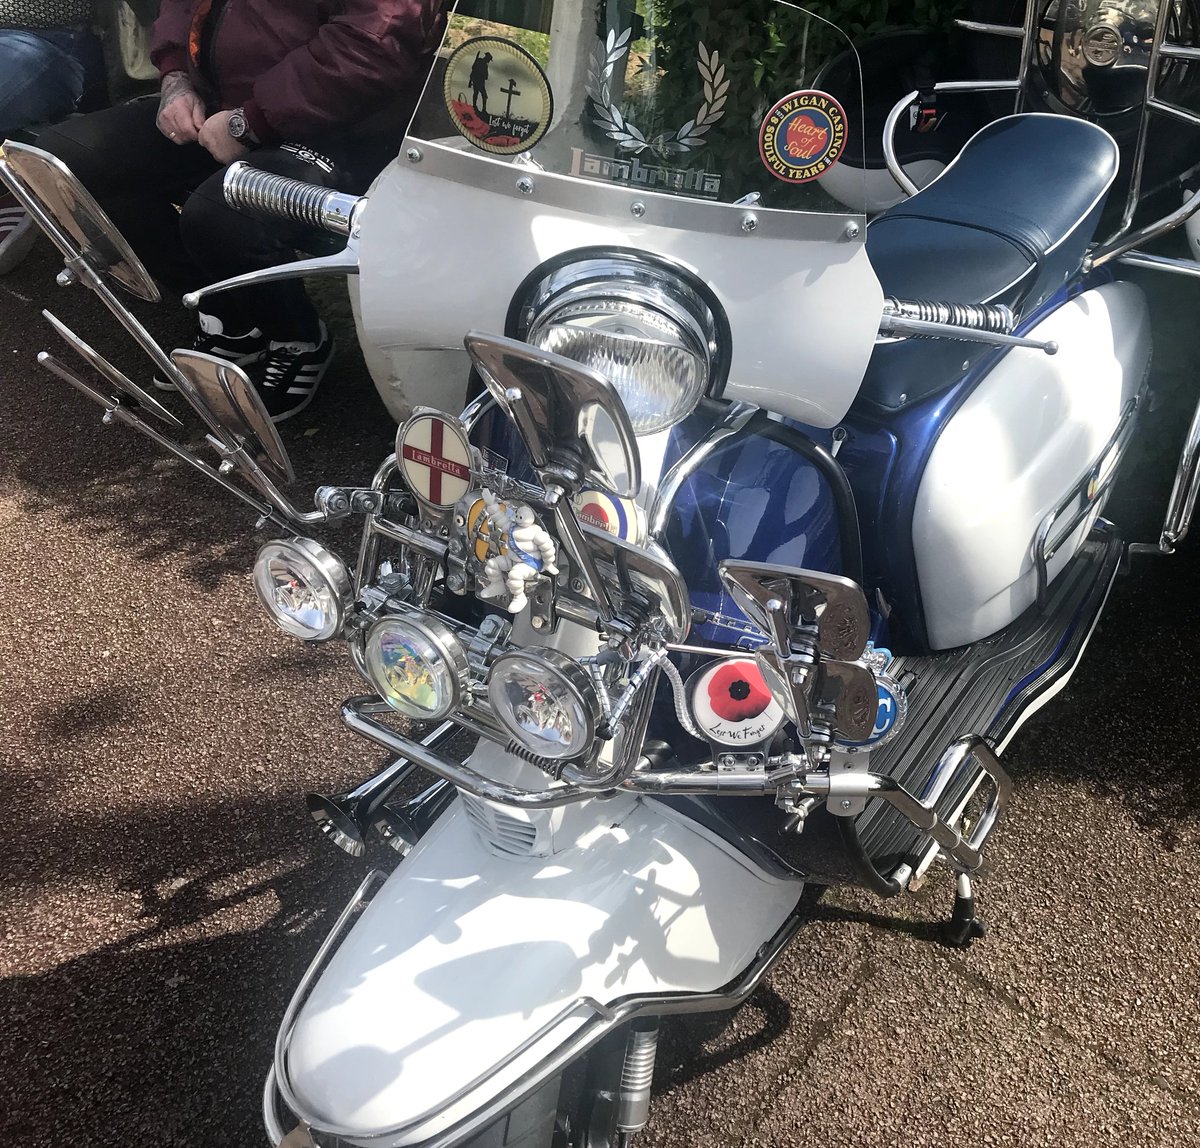 #beautifulscooter #chromewillgetyouhome #skegness